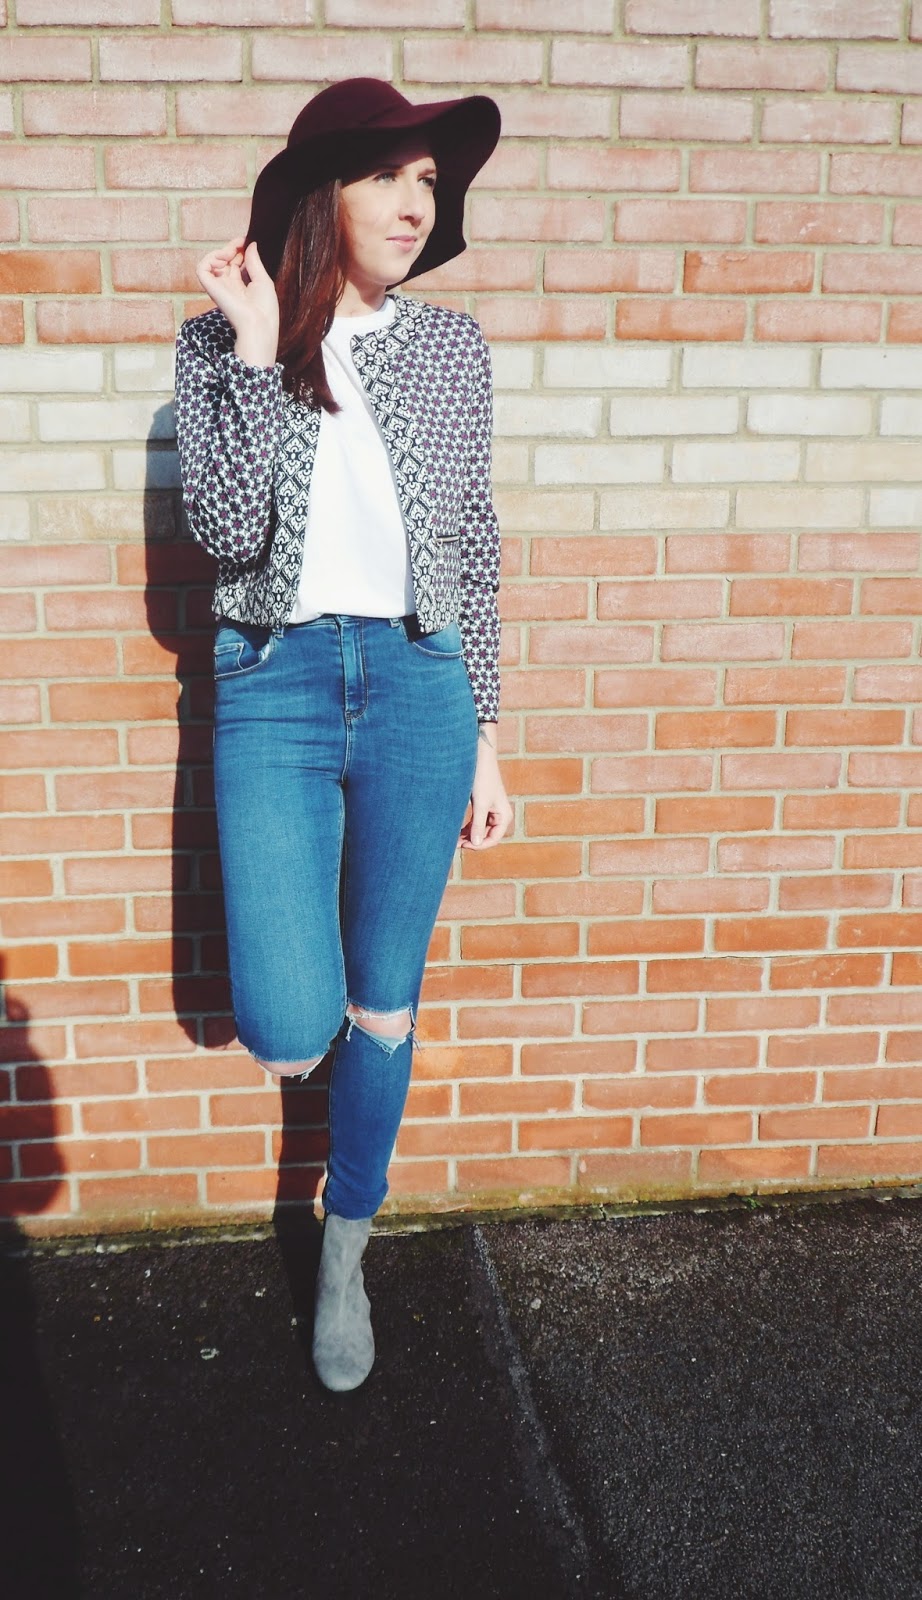 asseenonme, asos, primark, wiw, whatimwearing, whatibought, ootd, outfitoftheday,. lotd, lookoftheday, fbloggers, fashionbloggers, fblogger, seventiesfashion, theseventies, rippedjeans, boyfriendtee, cleatedheel, boots